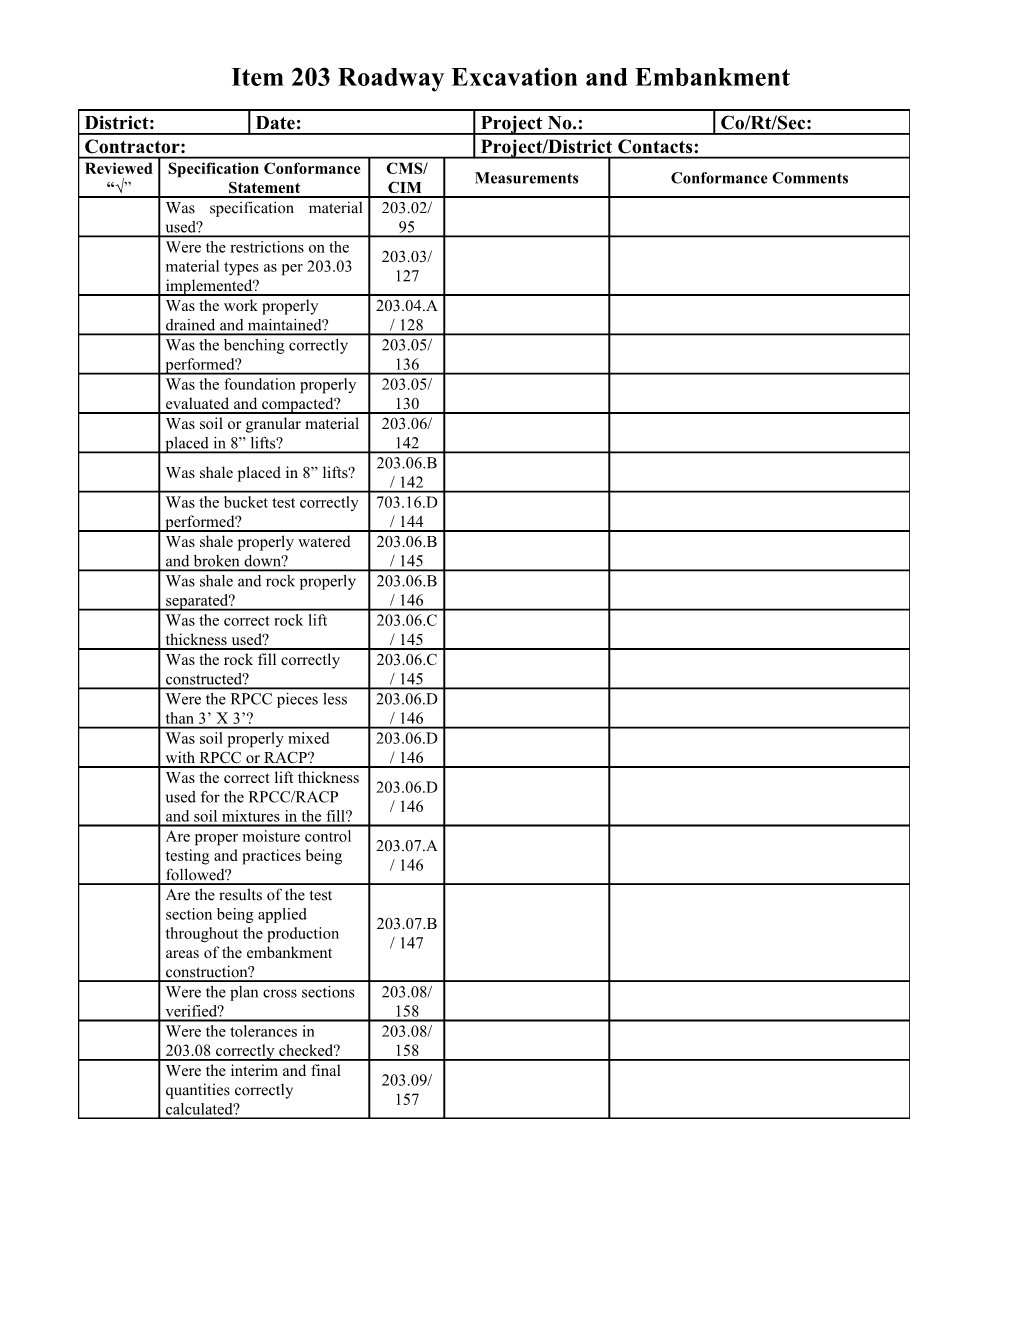 Complete Listing of TPR Checklists for 2005